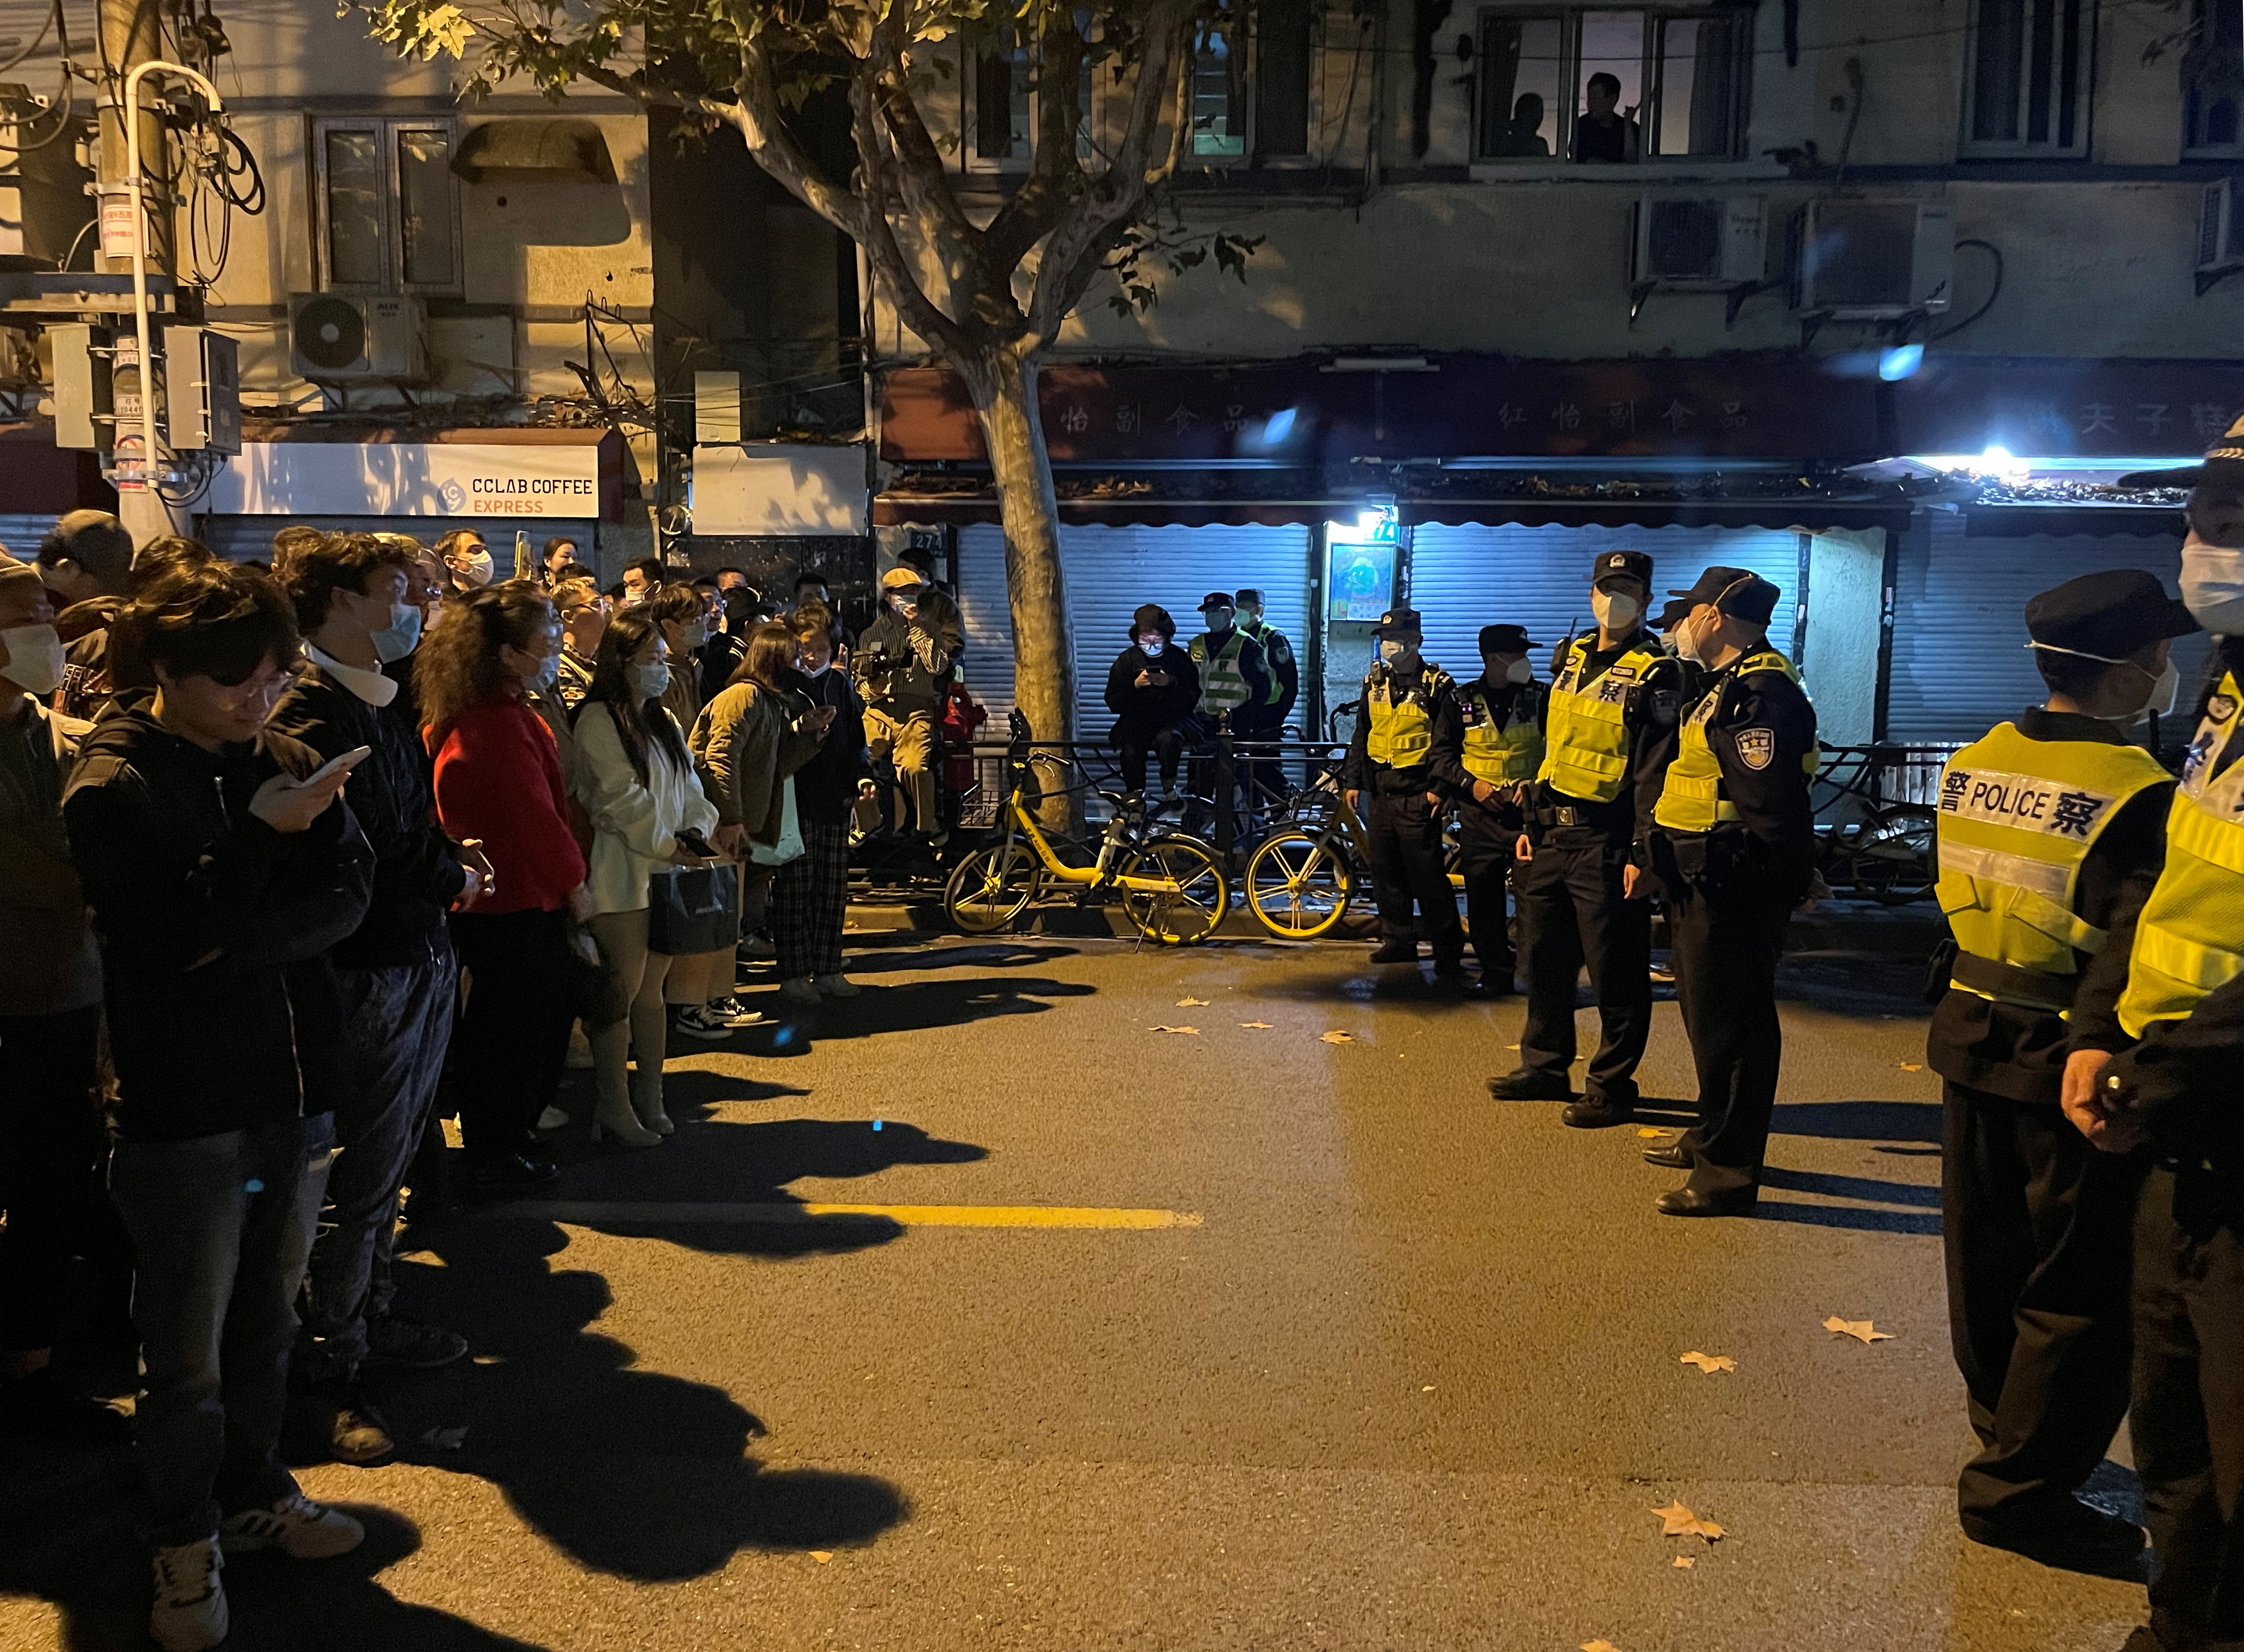 People stand in front of a police line in Shanghai